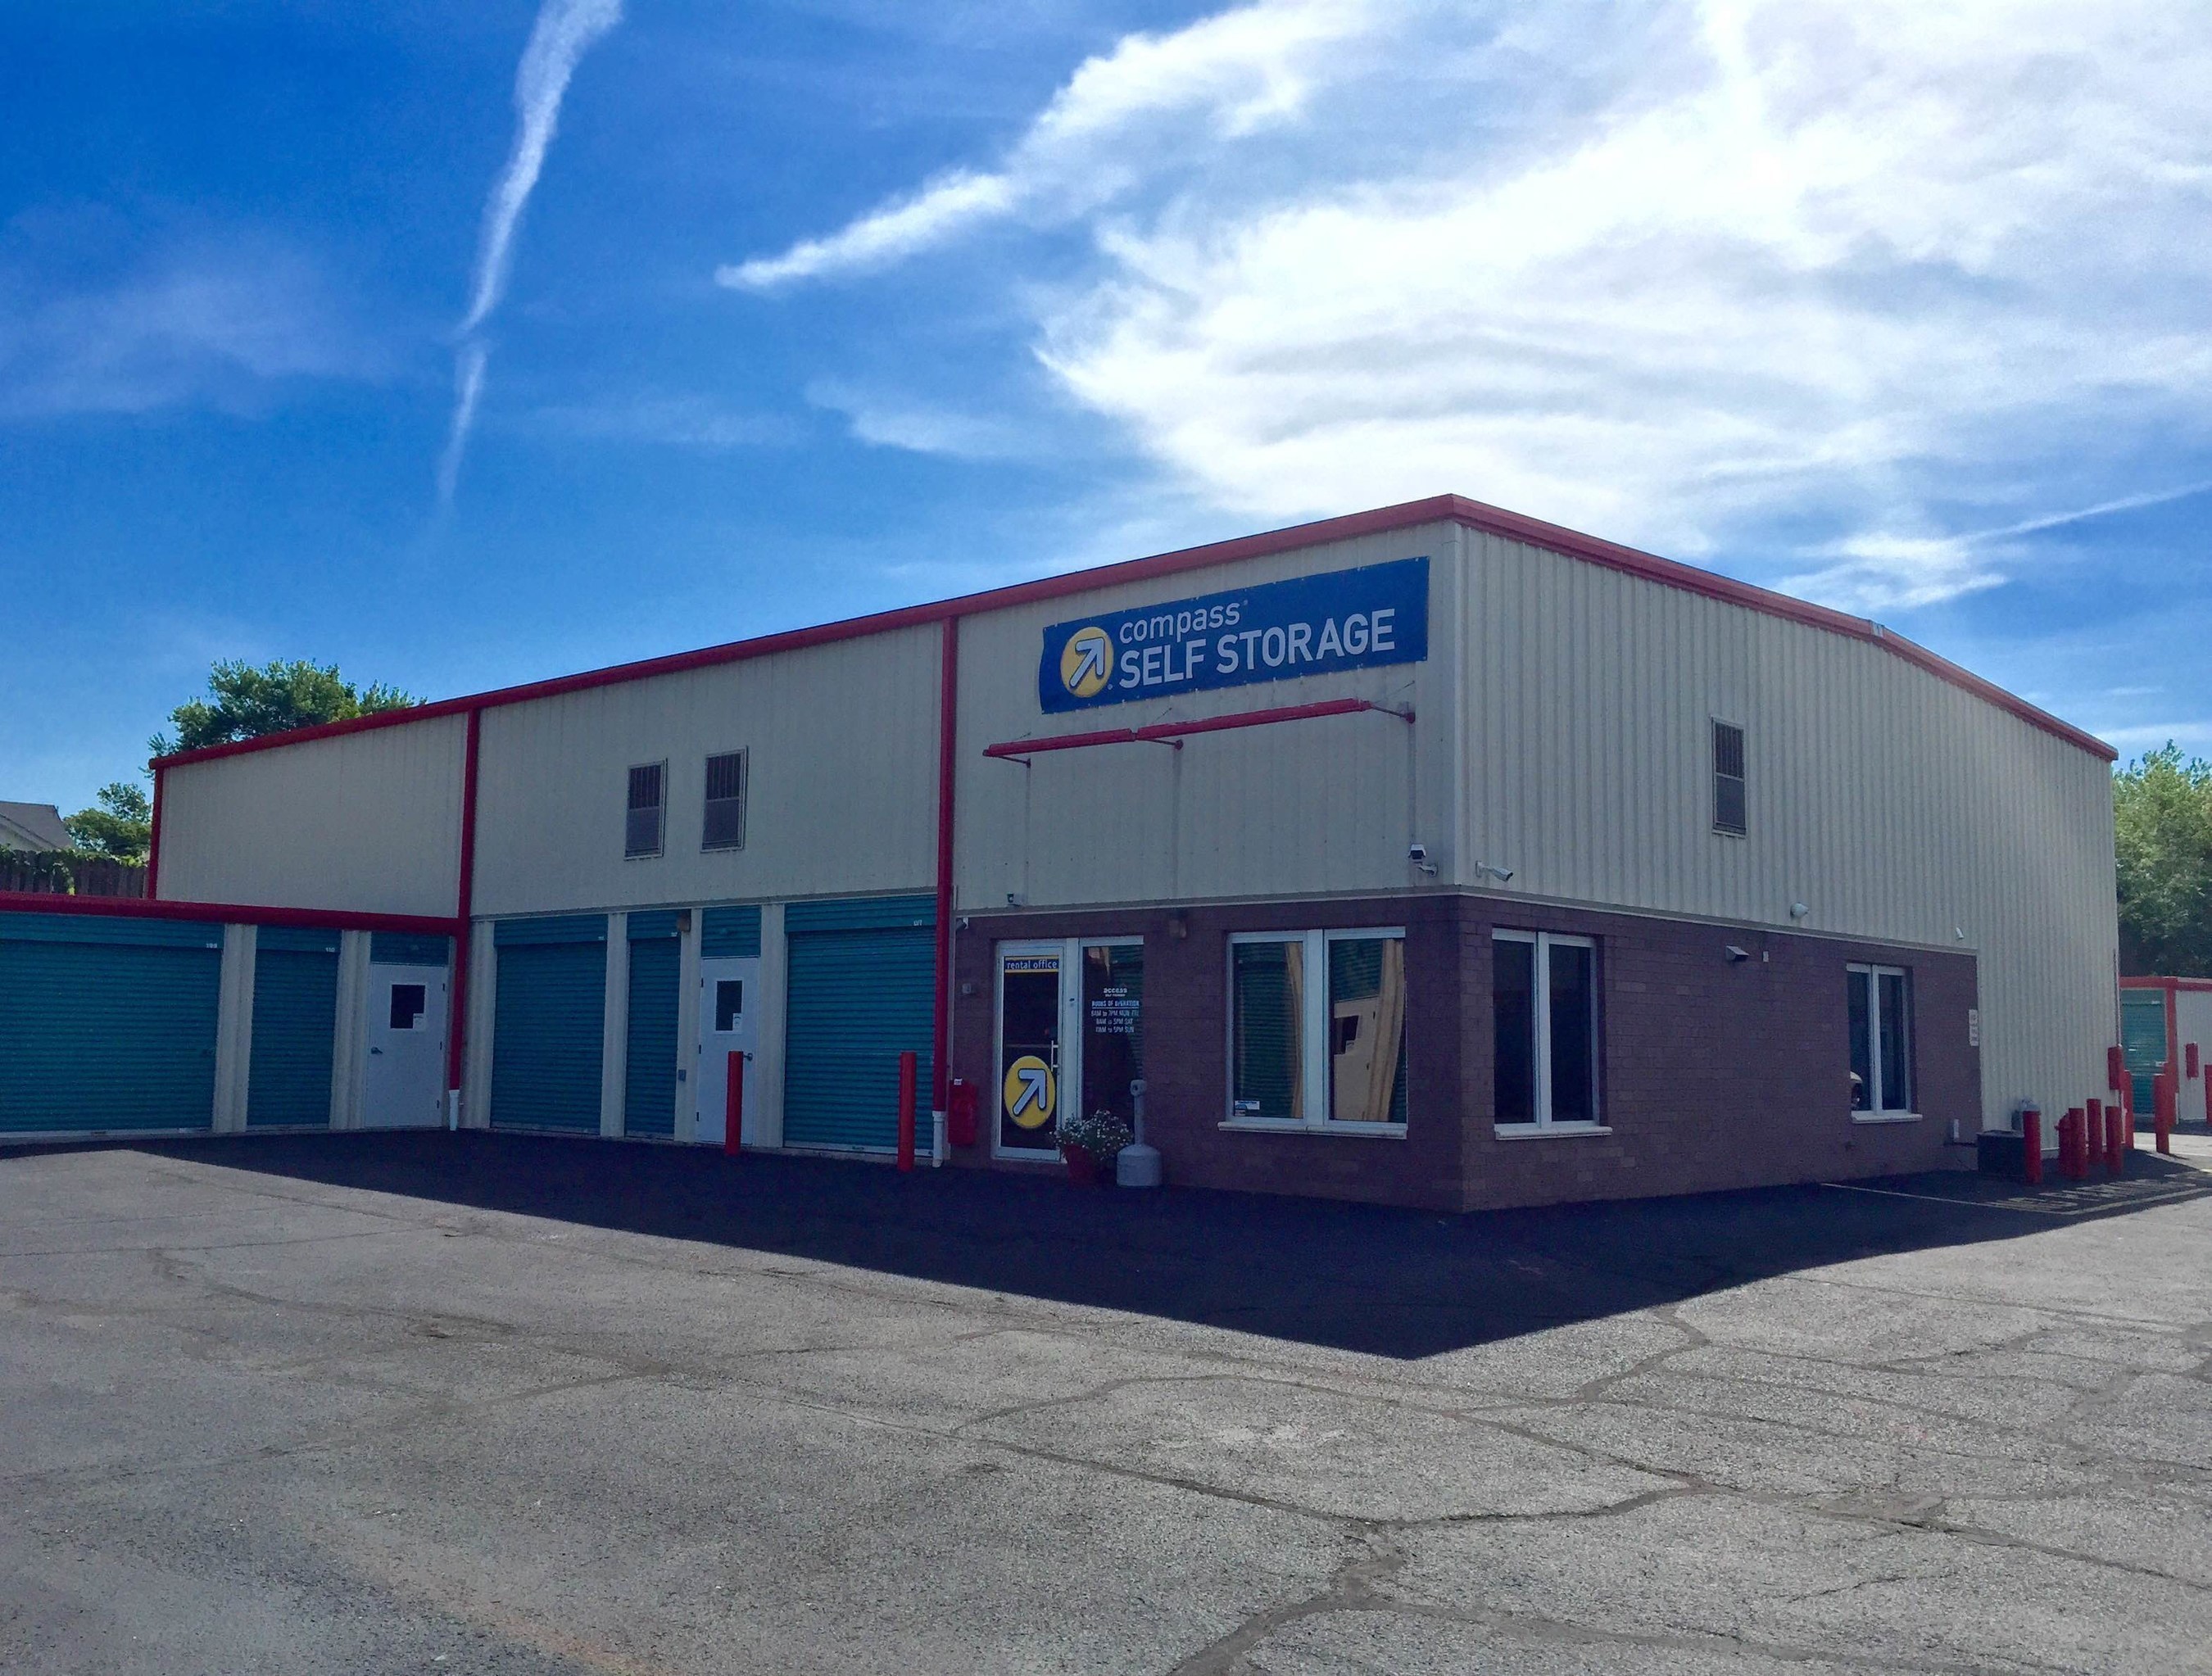 Compass Self Storage acquired this superior quality self storage center in Manville, NJ